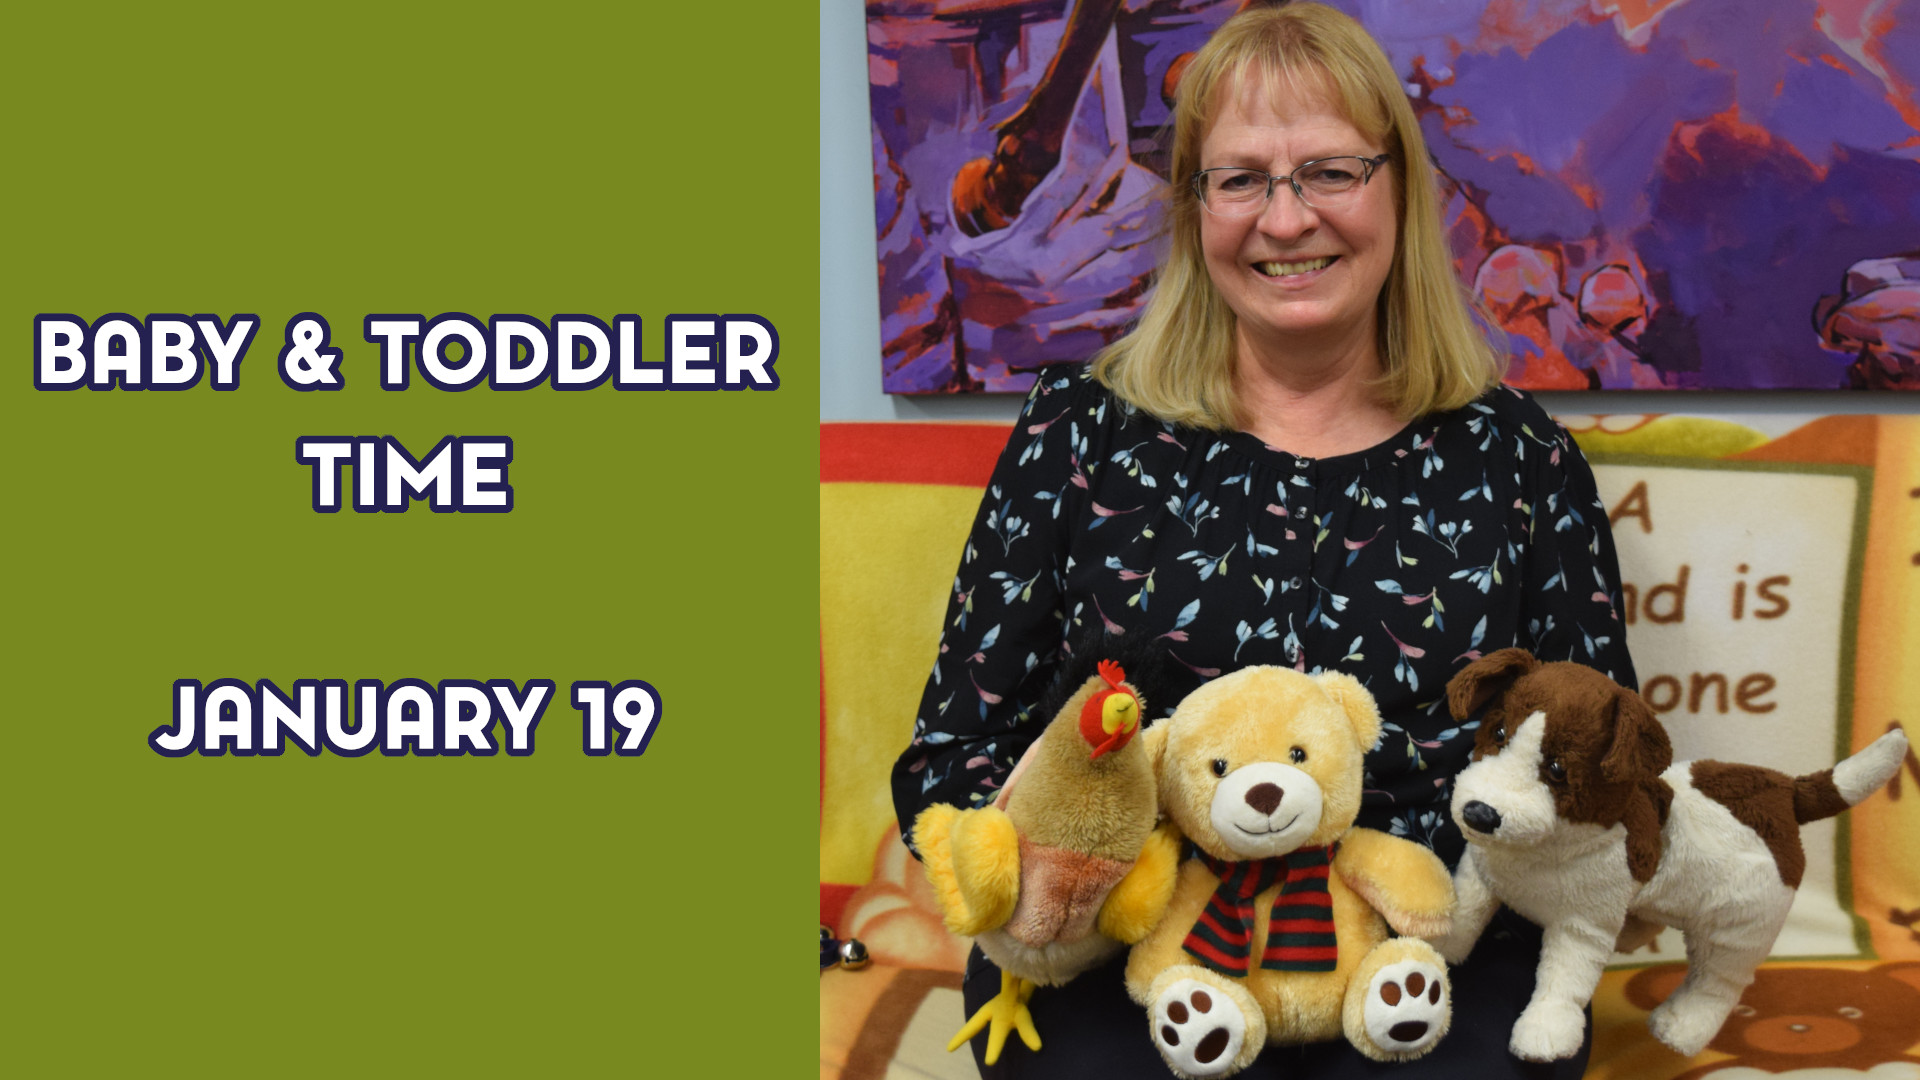 A woman holds stuffed animals next to the text "Baby and Toddler Time January 19"